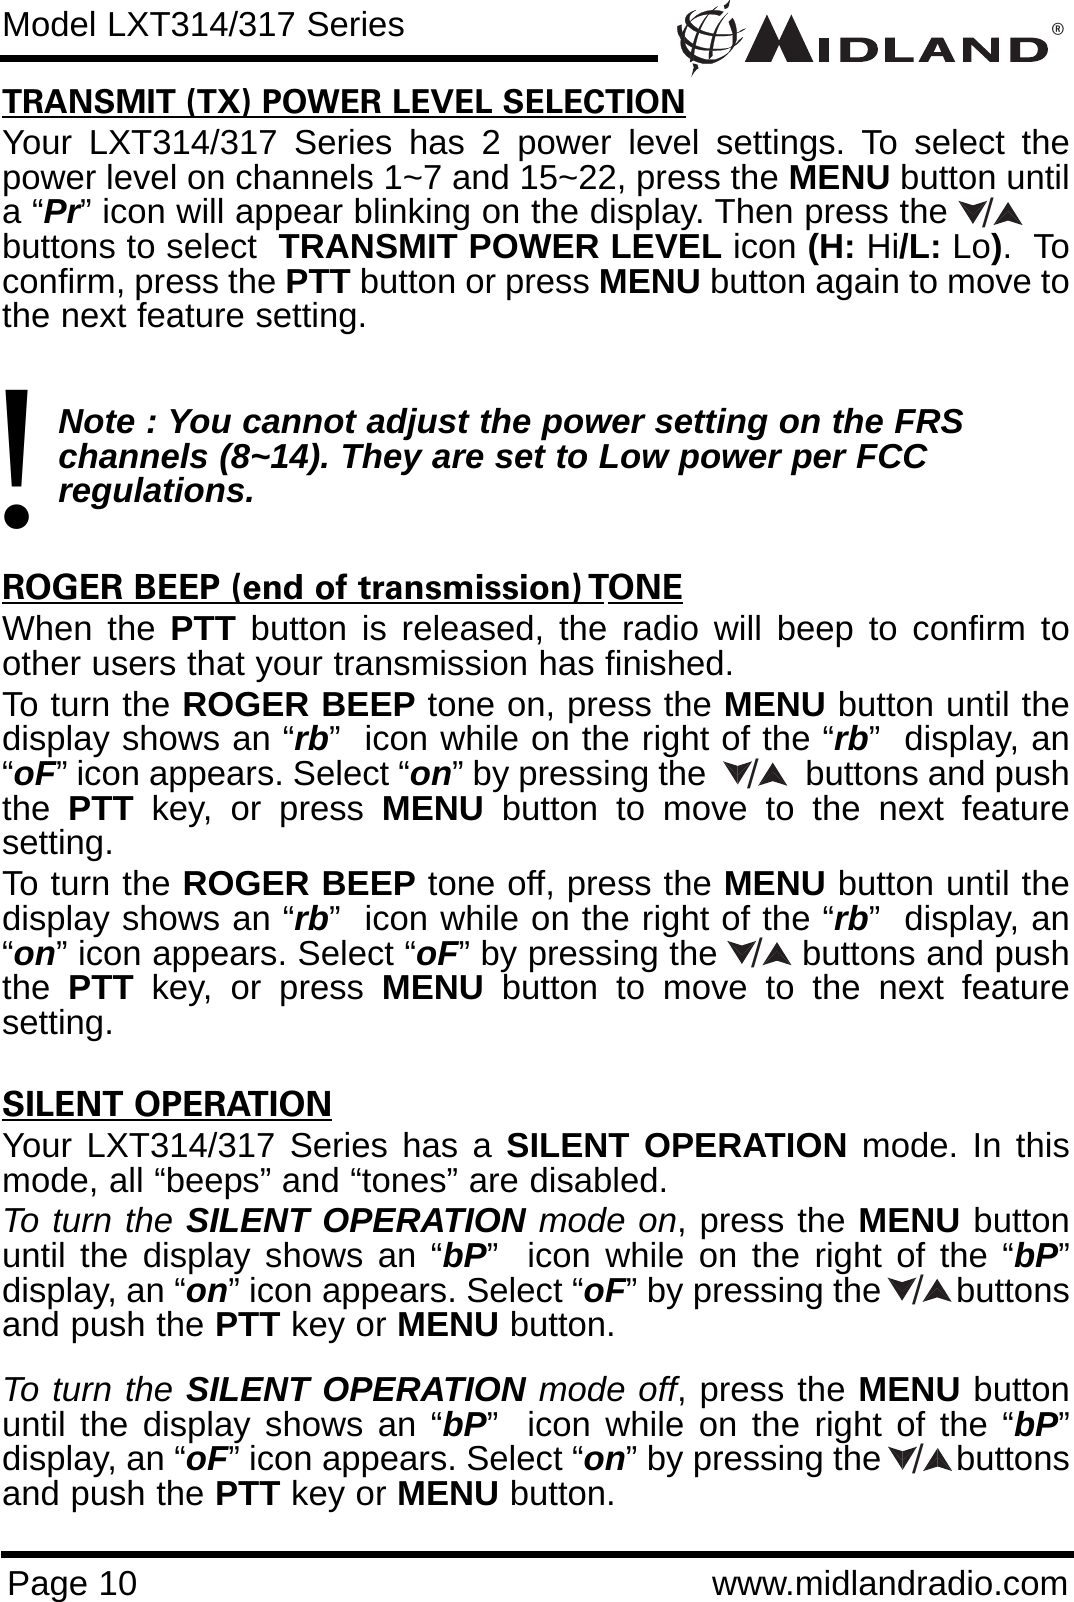 ®Page 10 www.midlandradio.comTRANSMIT (TX) POWER LEVEL SELECTIONYour LXT314/317 Series has 2 power level settings. To select thepower level on channels 1~7 and 15~22, press the MENU button untila “Pr” icon will appear blinking on the display. Then press the           buttons to select  TRANSMIT POWER LEVEL icon (H: Hi/L: Lo).  Toconfirm, press the PTT button or press MENU button again to move tothe next feature setting. Note : You cannot adjust the power setting on the FRS   channels (8~14). They are set to Low power per FCC          regulations.ROGER BEEP (end of transmission) TONEWhen the PTT button is released, the radio will beep to confirm toother users that your transmission has finished. To turn the ROGER BEEP tone on, press the MENU button until thedisplay shows an “rb”  icon while on the right of the “rb”  display, an“oF” icon appears. Select “on” by pressing the           buttons and pushthe  PTT key, or press MENU button to move to the next featuresetting. To turn the ROGER BEEP tone off, press the MENU button until thedisplay shows an “rb”  icon while on the right of the “rb”  display, an“on” icon appears. Select “oF” by pressing the        buttons and pushthe  PTT key, or press MENU button to move to the next featuresetting.SILENT OPERATIONYour LXT314/317 Series has a SILENT OPERATION mode. In thismode, all “beeps” and “tones” are disabled. To turn the SILENT OPERATION mode on, press the MENU buttonuntil the display shows an “bP”  icon while on the right of the “bP”display, an “on” icon appears. Select “oF” by pressing the        buttonsand push the PTT key or MENU button. To turn the SILENT OPERATION mode off, press the MENU buttonuntil the display shows an “bP”  icon while on the right of the “bP”display, an “oF” icon appears. Select “on” by pressing the        buttonsand push the PTT key or MENU button.Model LXT314/317 Series/!////